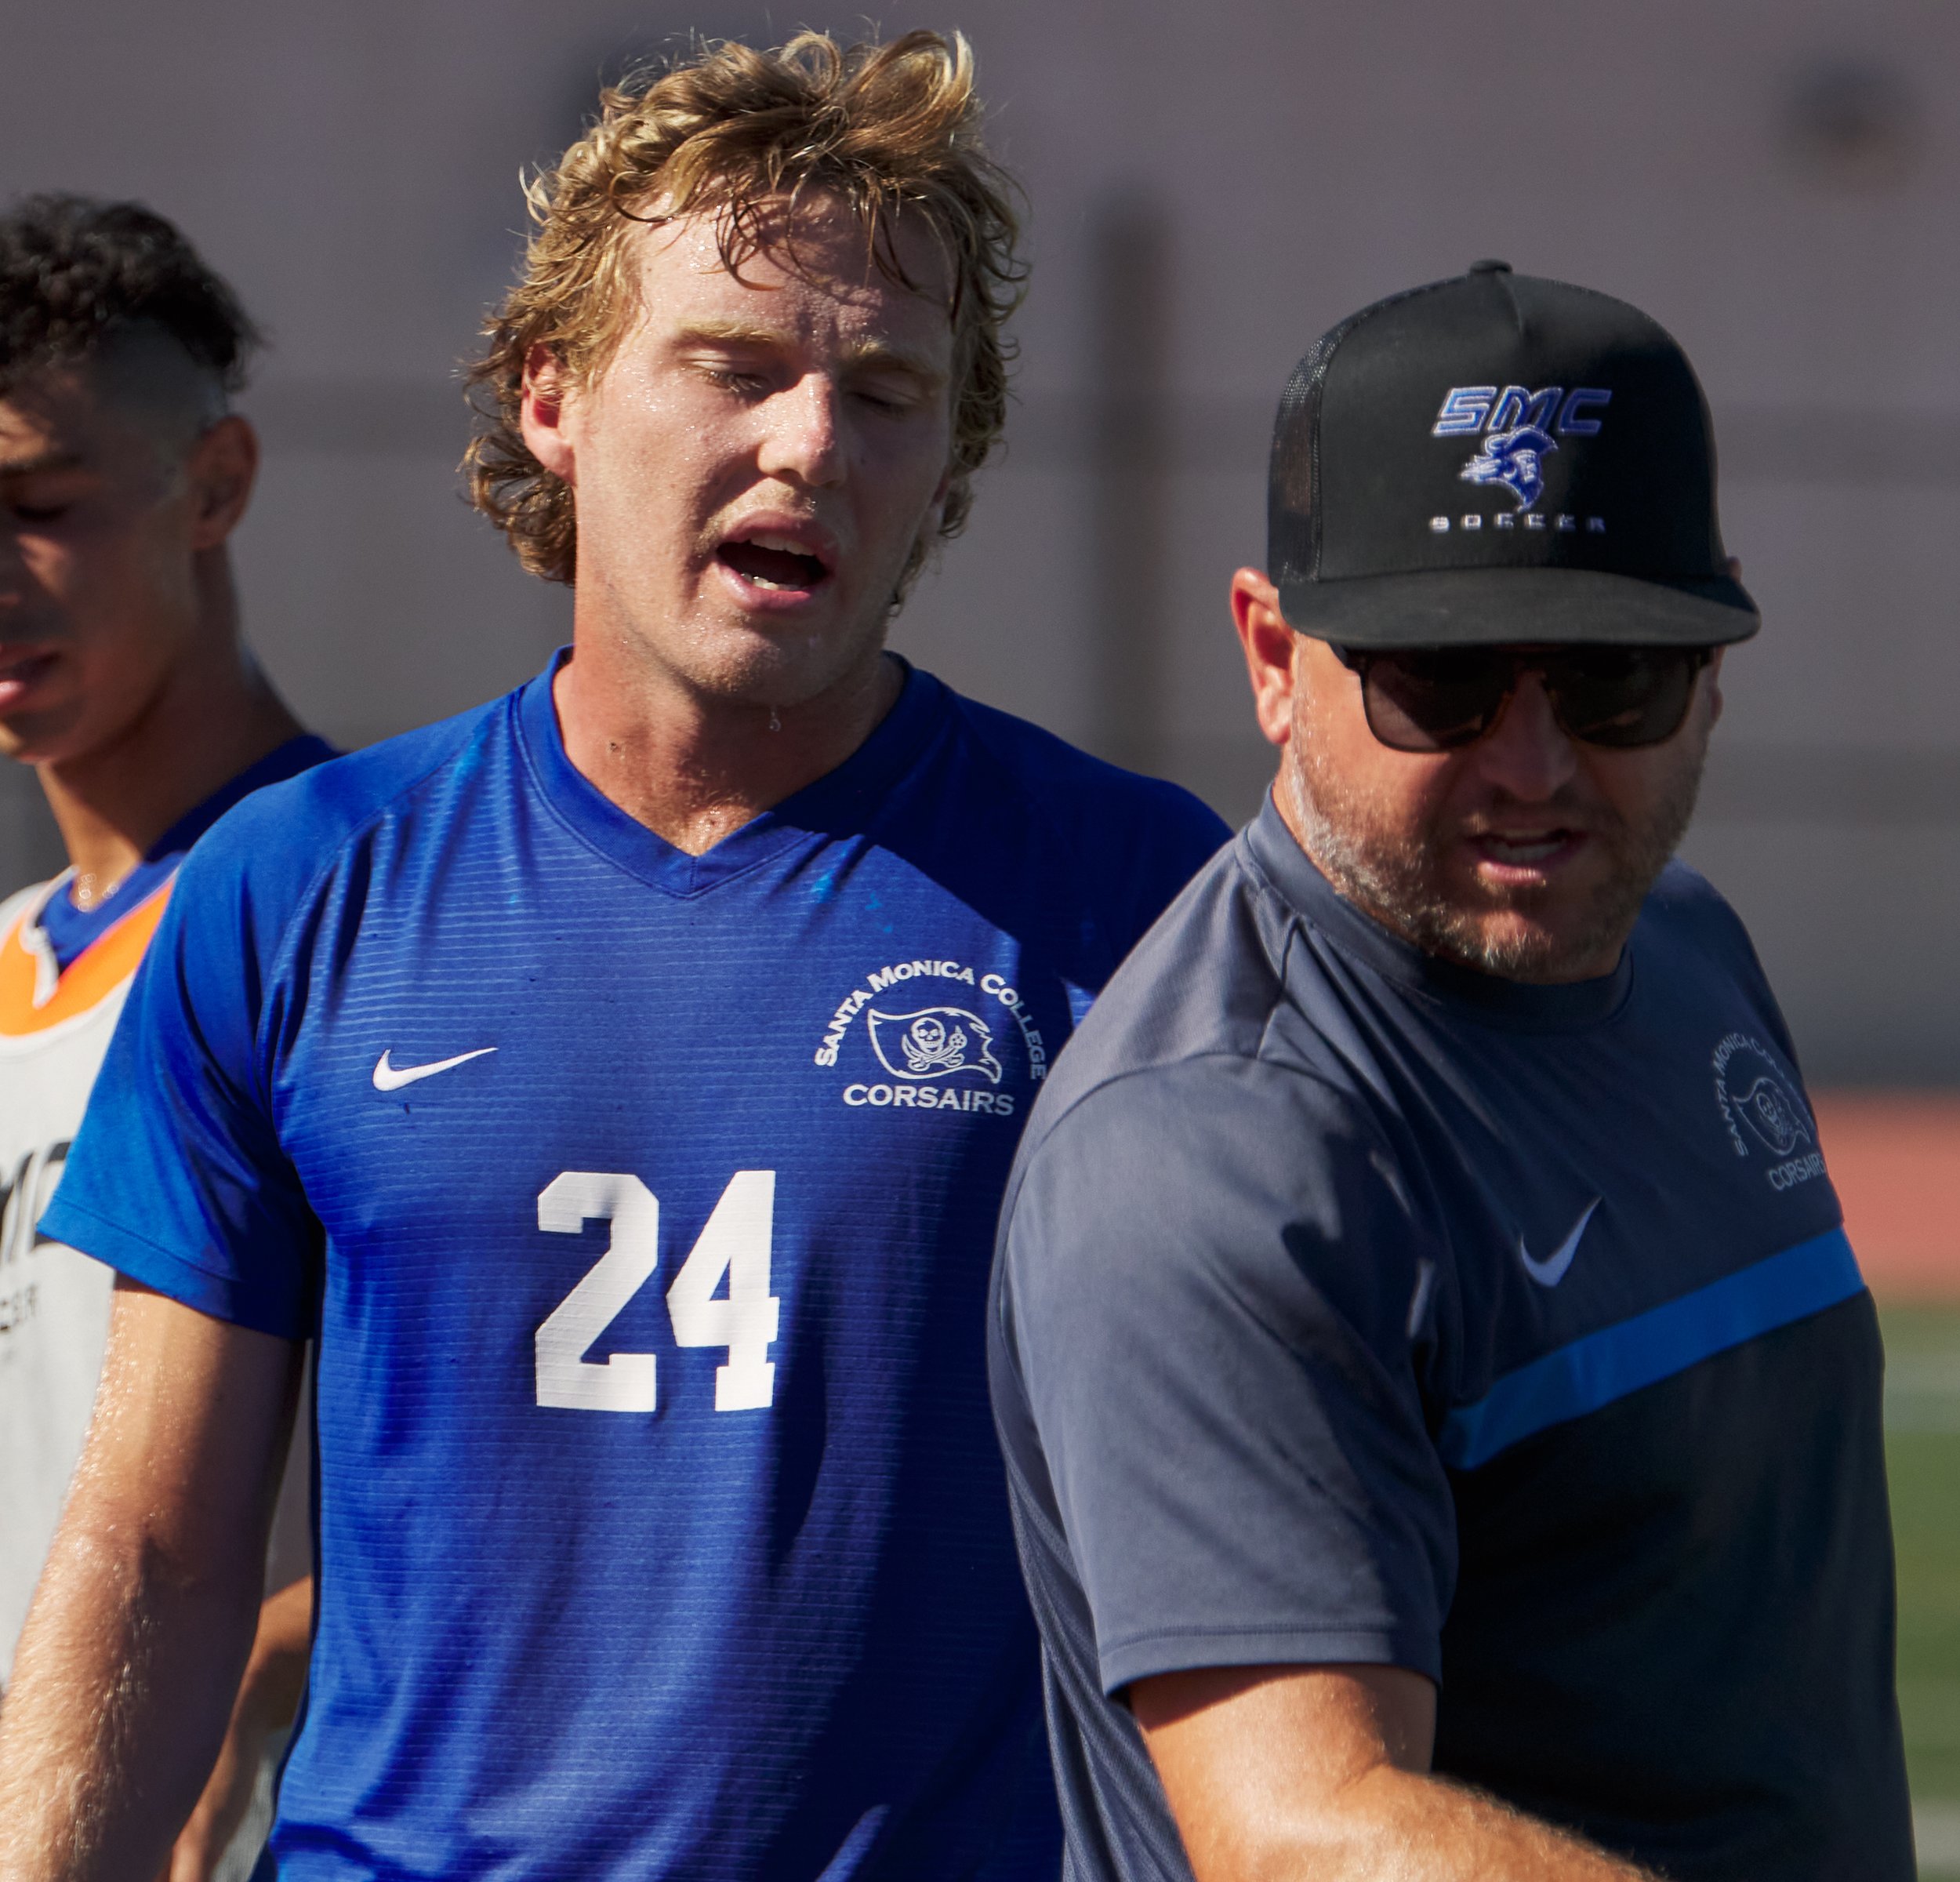  Santa Monica College Corsairs Men's Soccer Head Coach Tim Pierce (right) talks with Alexander Lalor (left), who just scored the first goal of the match against the Rio Hondo College Roadrunners on Friday, Sept. 24, 2022, at Corsair Field in Santa Mo